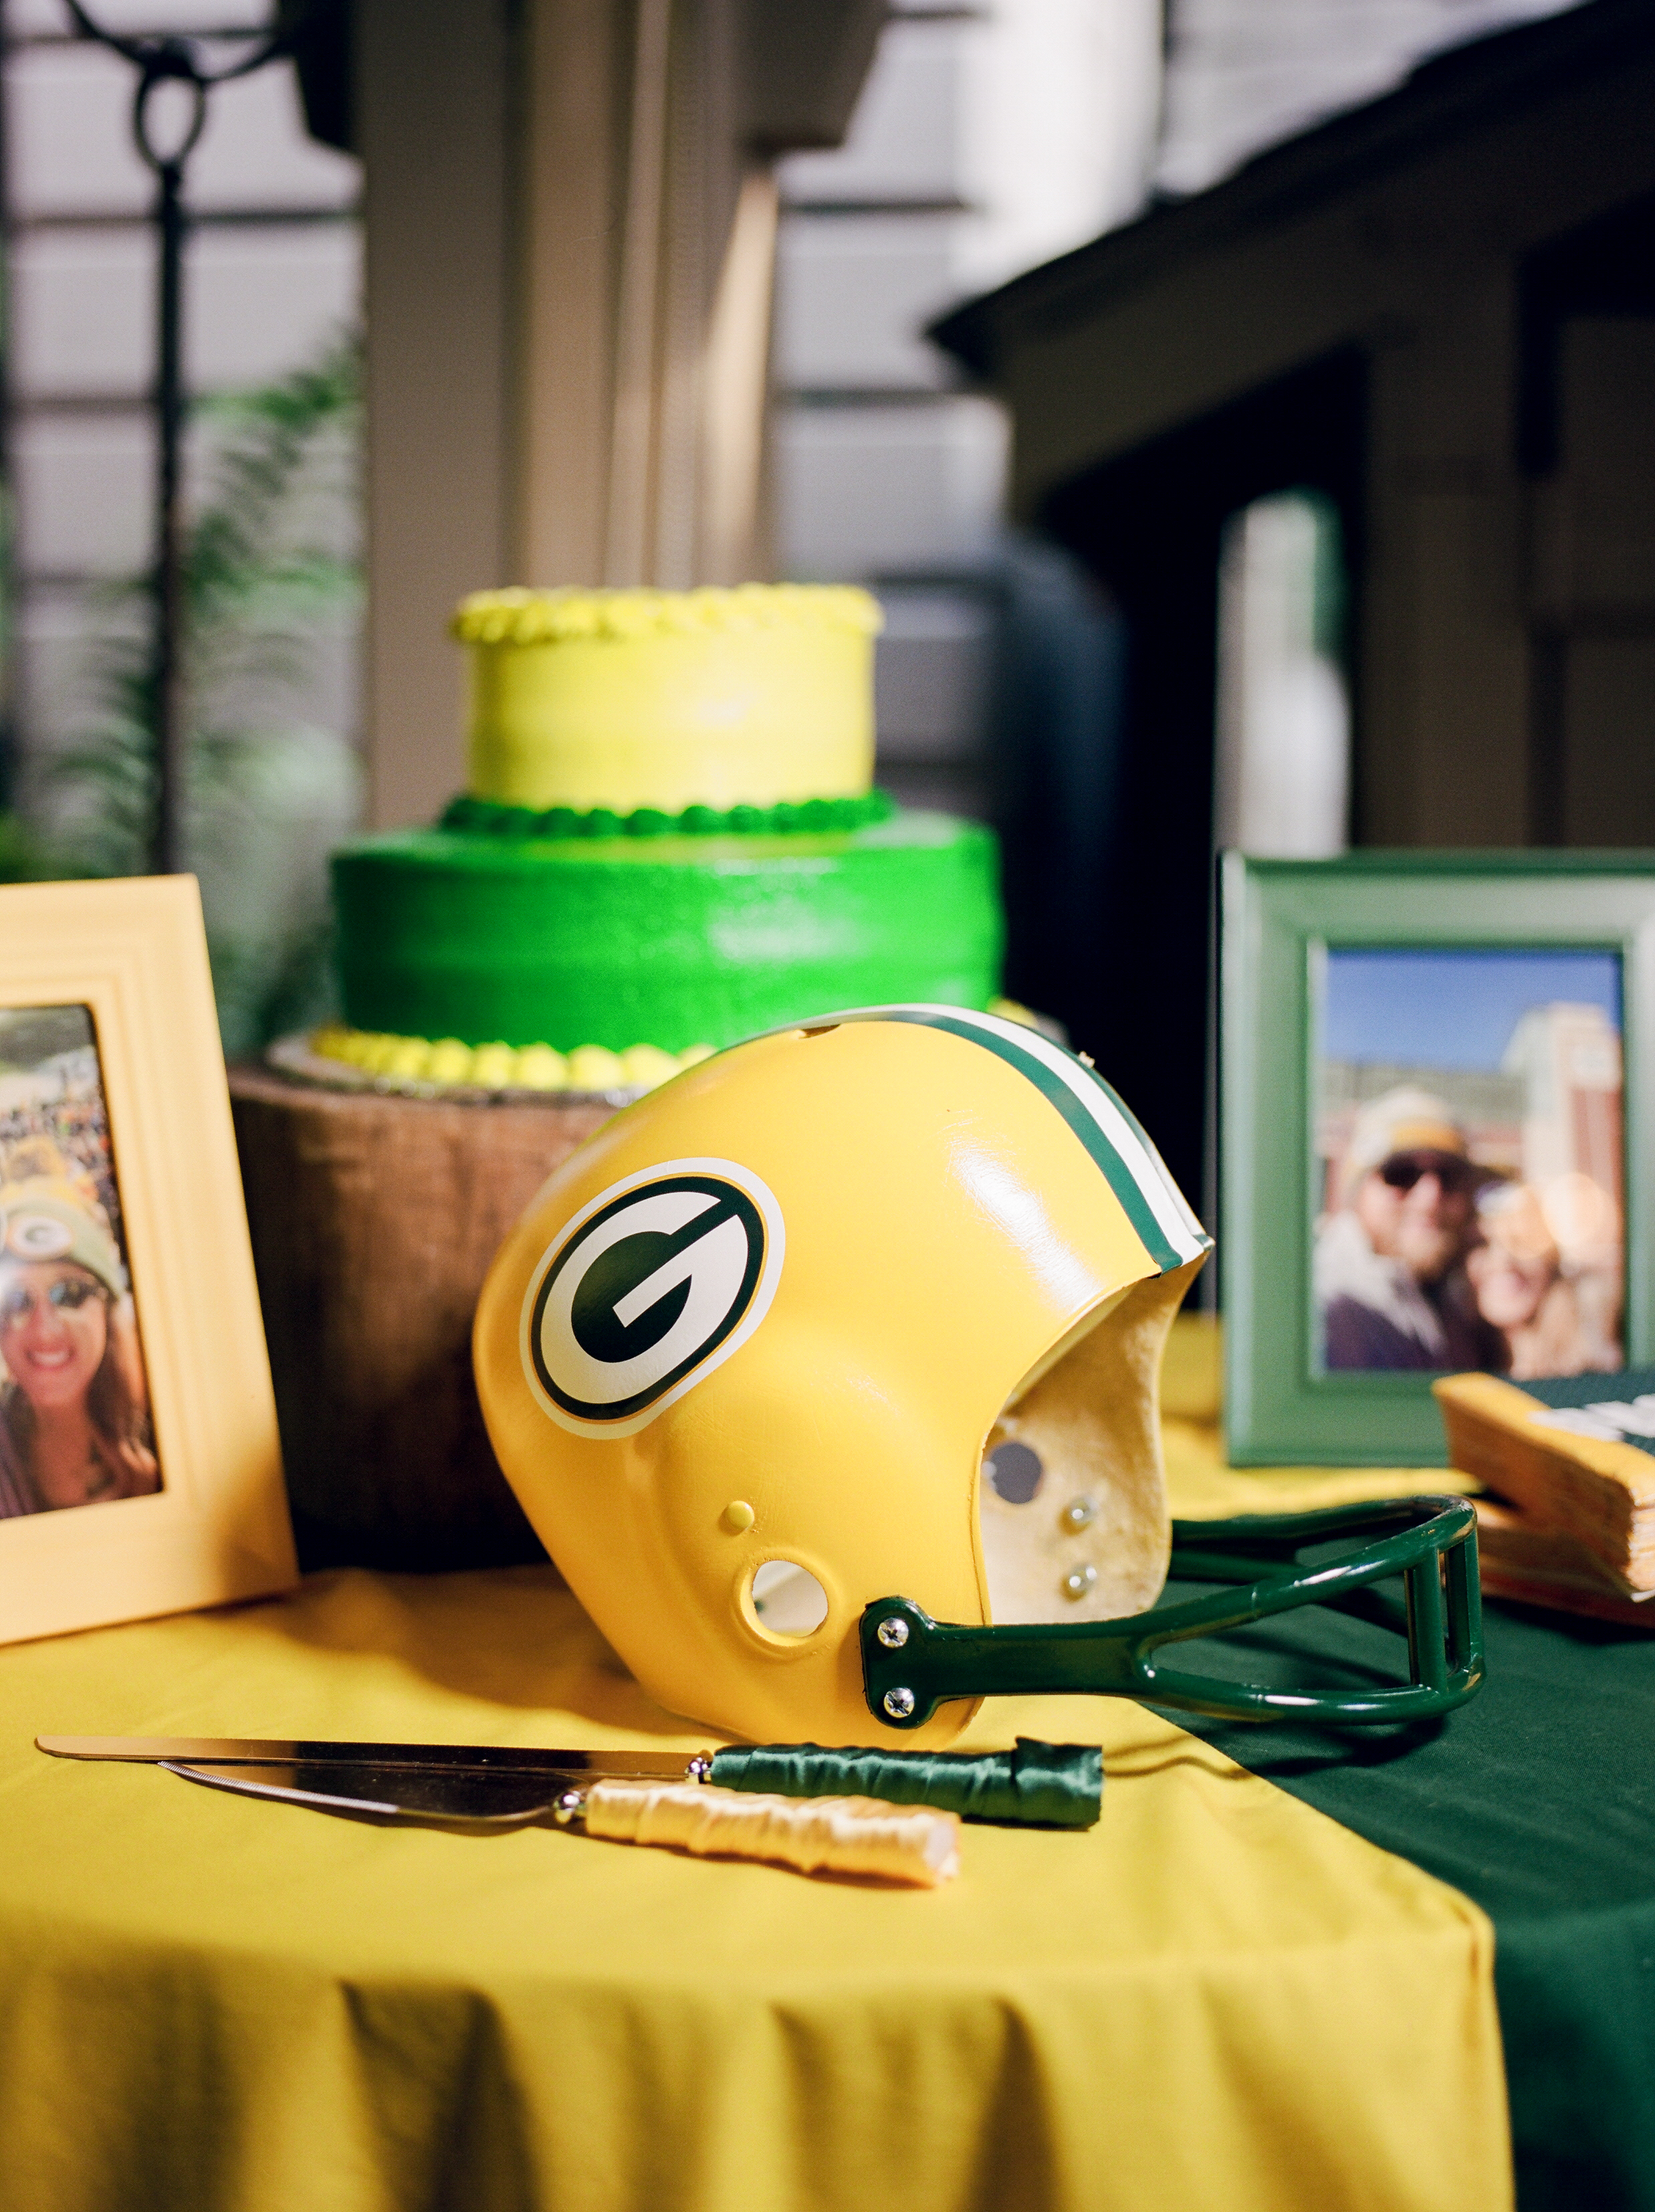 southern wedding traditions groom cake packers helmet photo